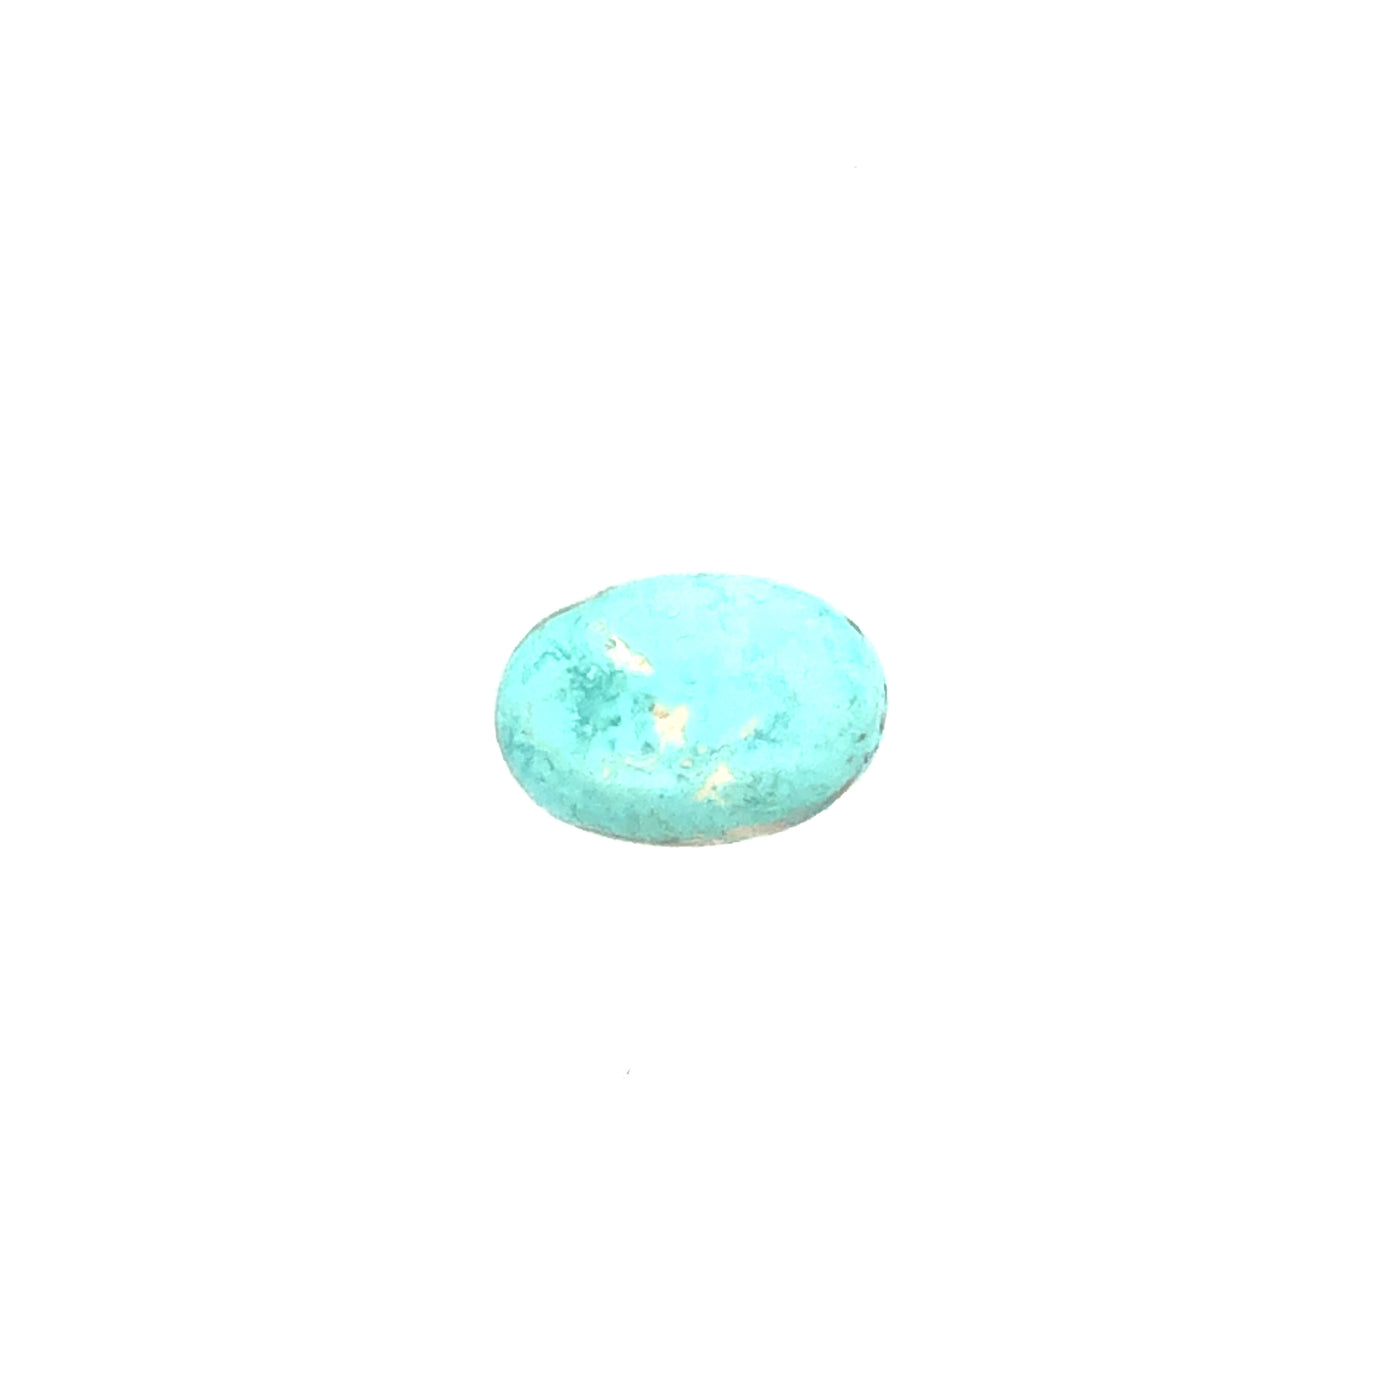 Loose Narooma Turquoise Oval Shaped 7.03Ct Blue